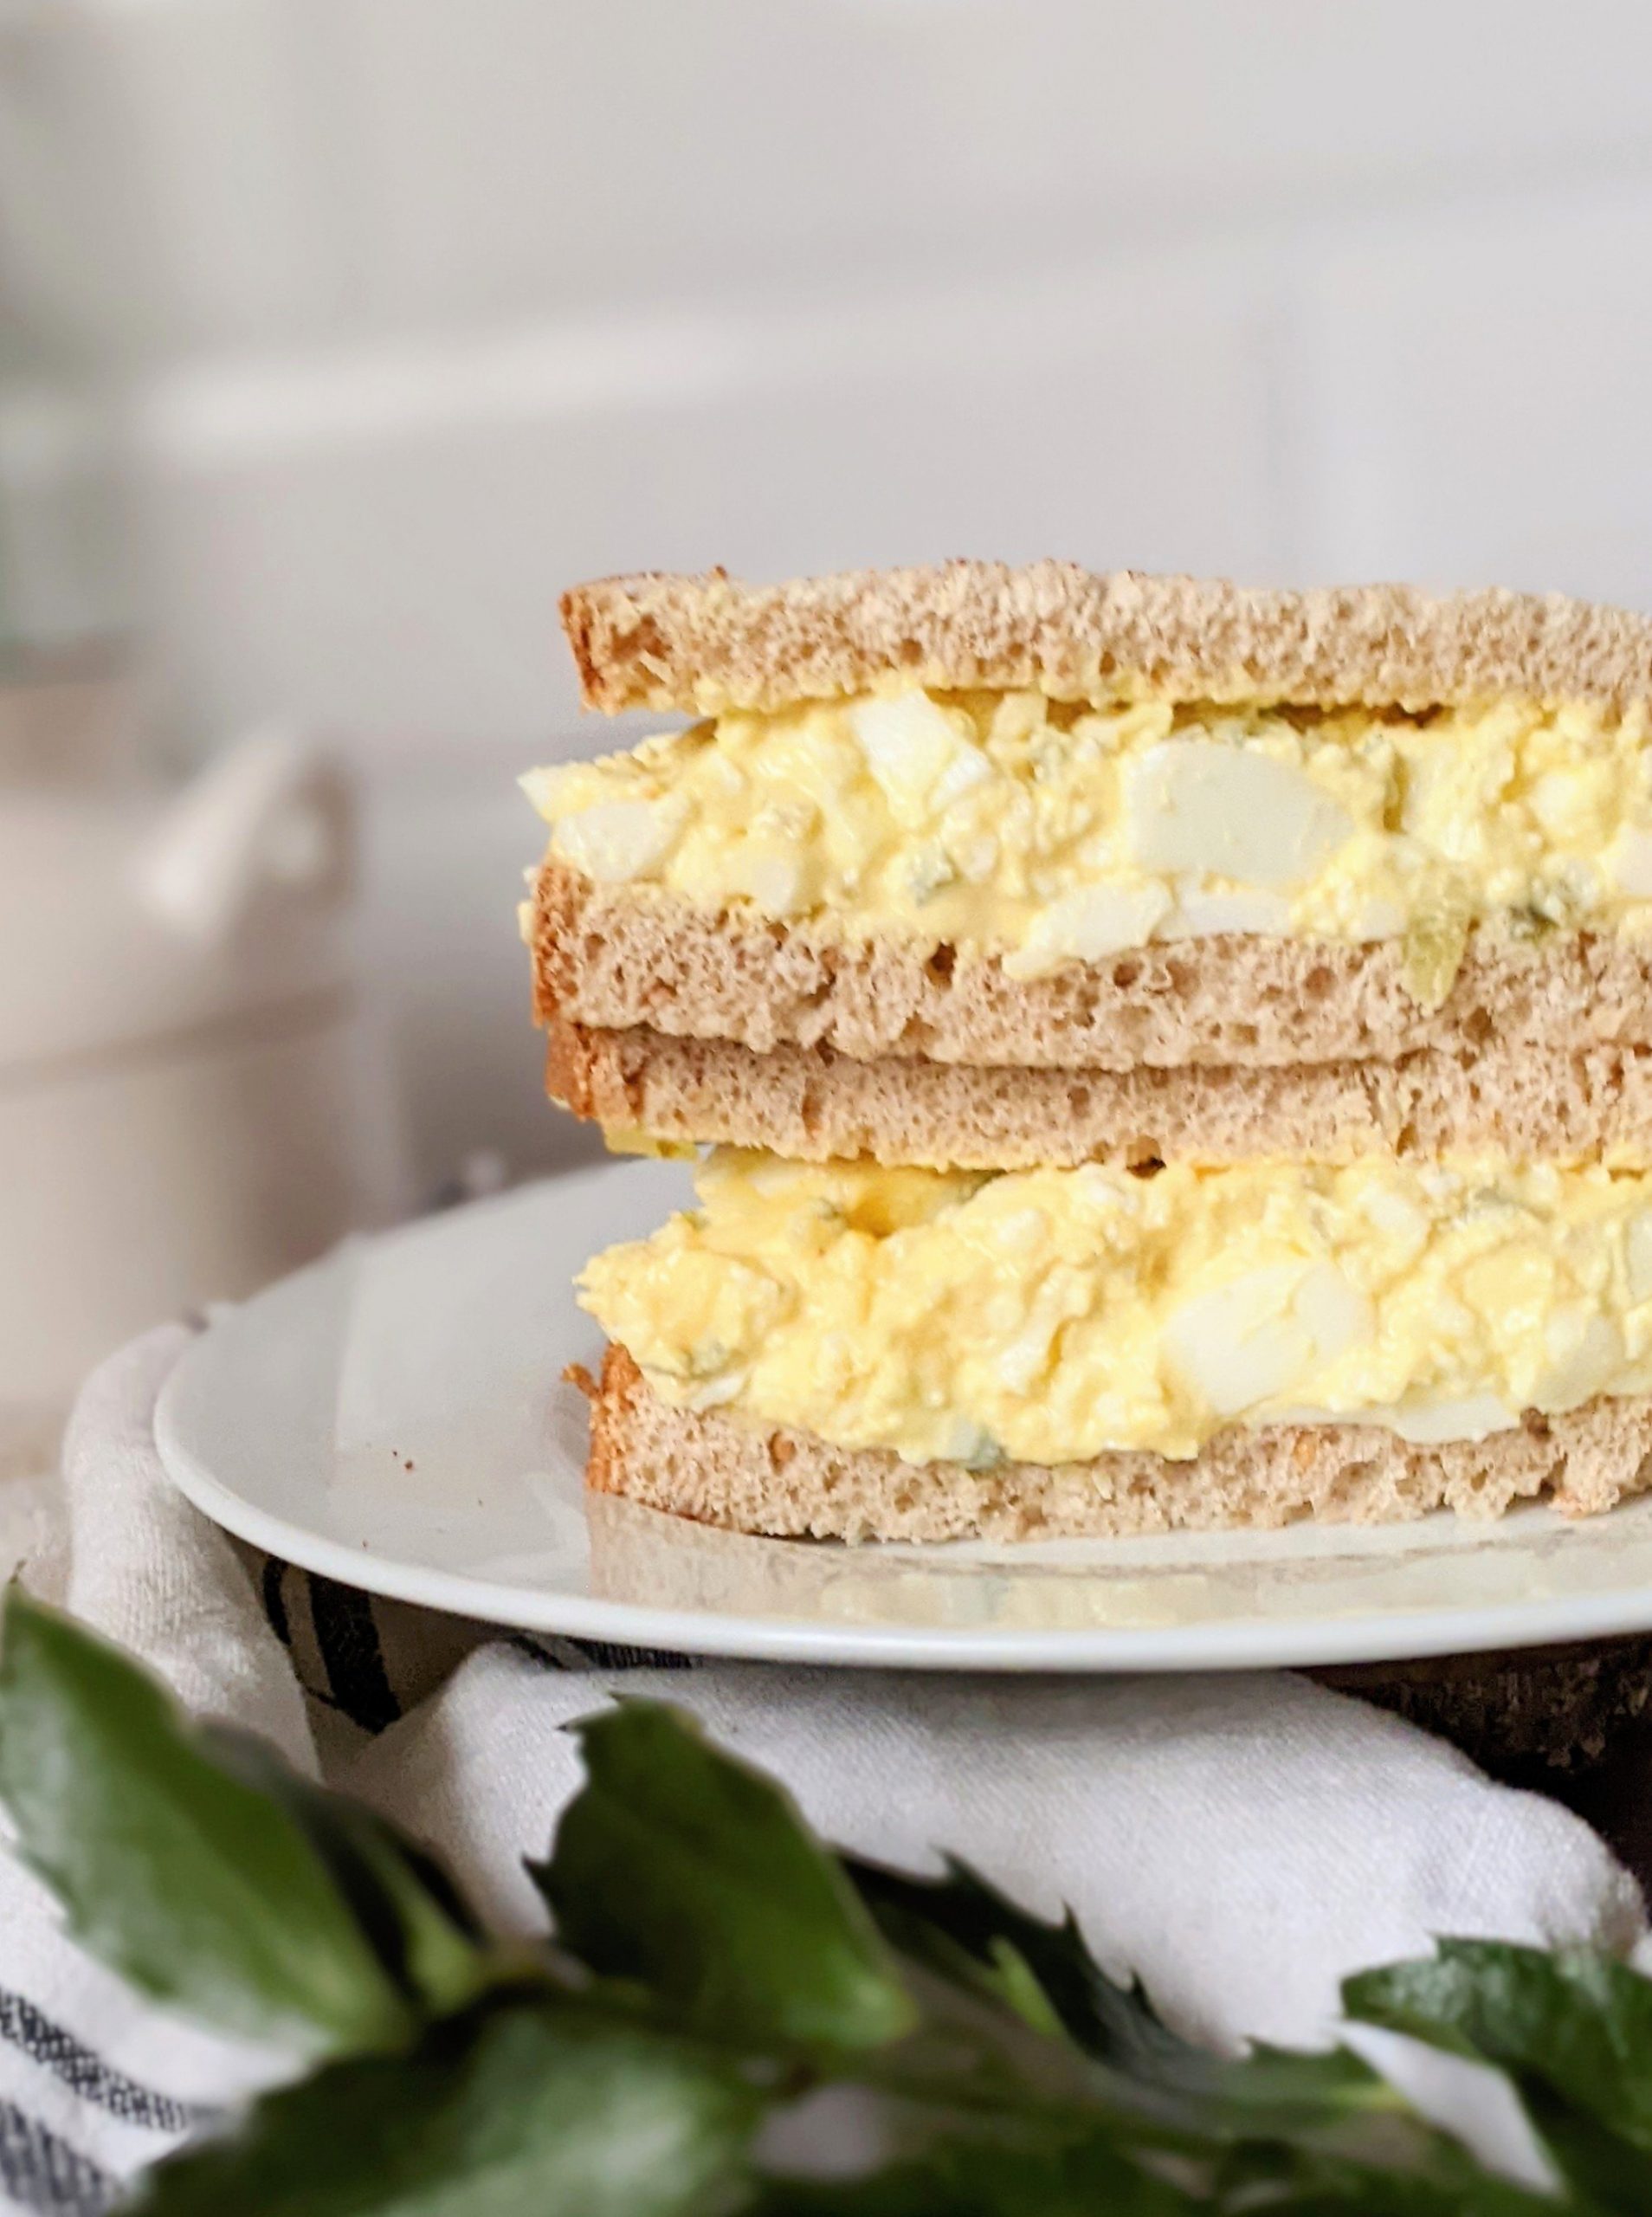 egg salad with relish recipe classic egg salad with pickle relish gluten free low carb sweet relish egg salad sandwich